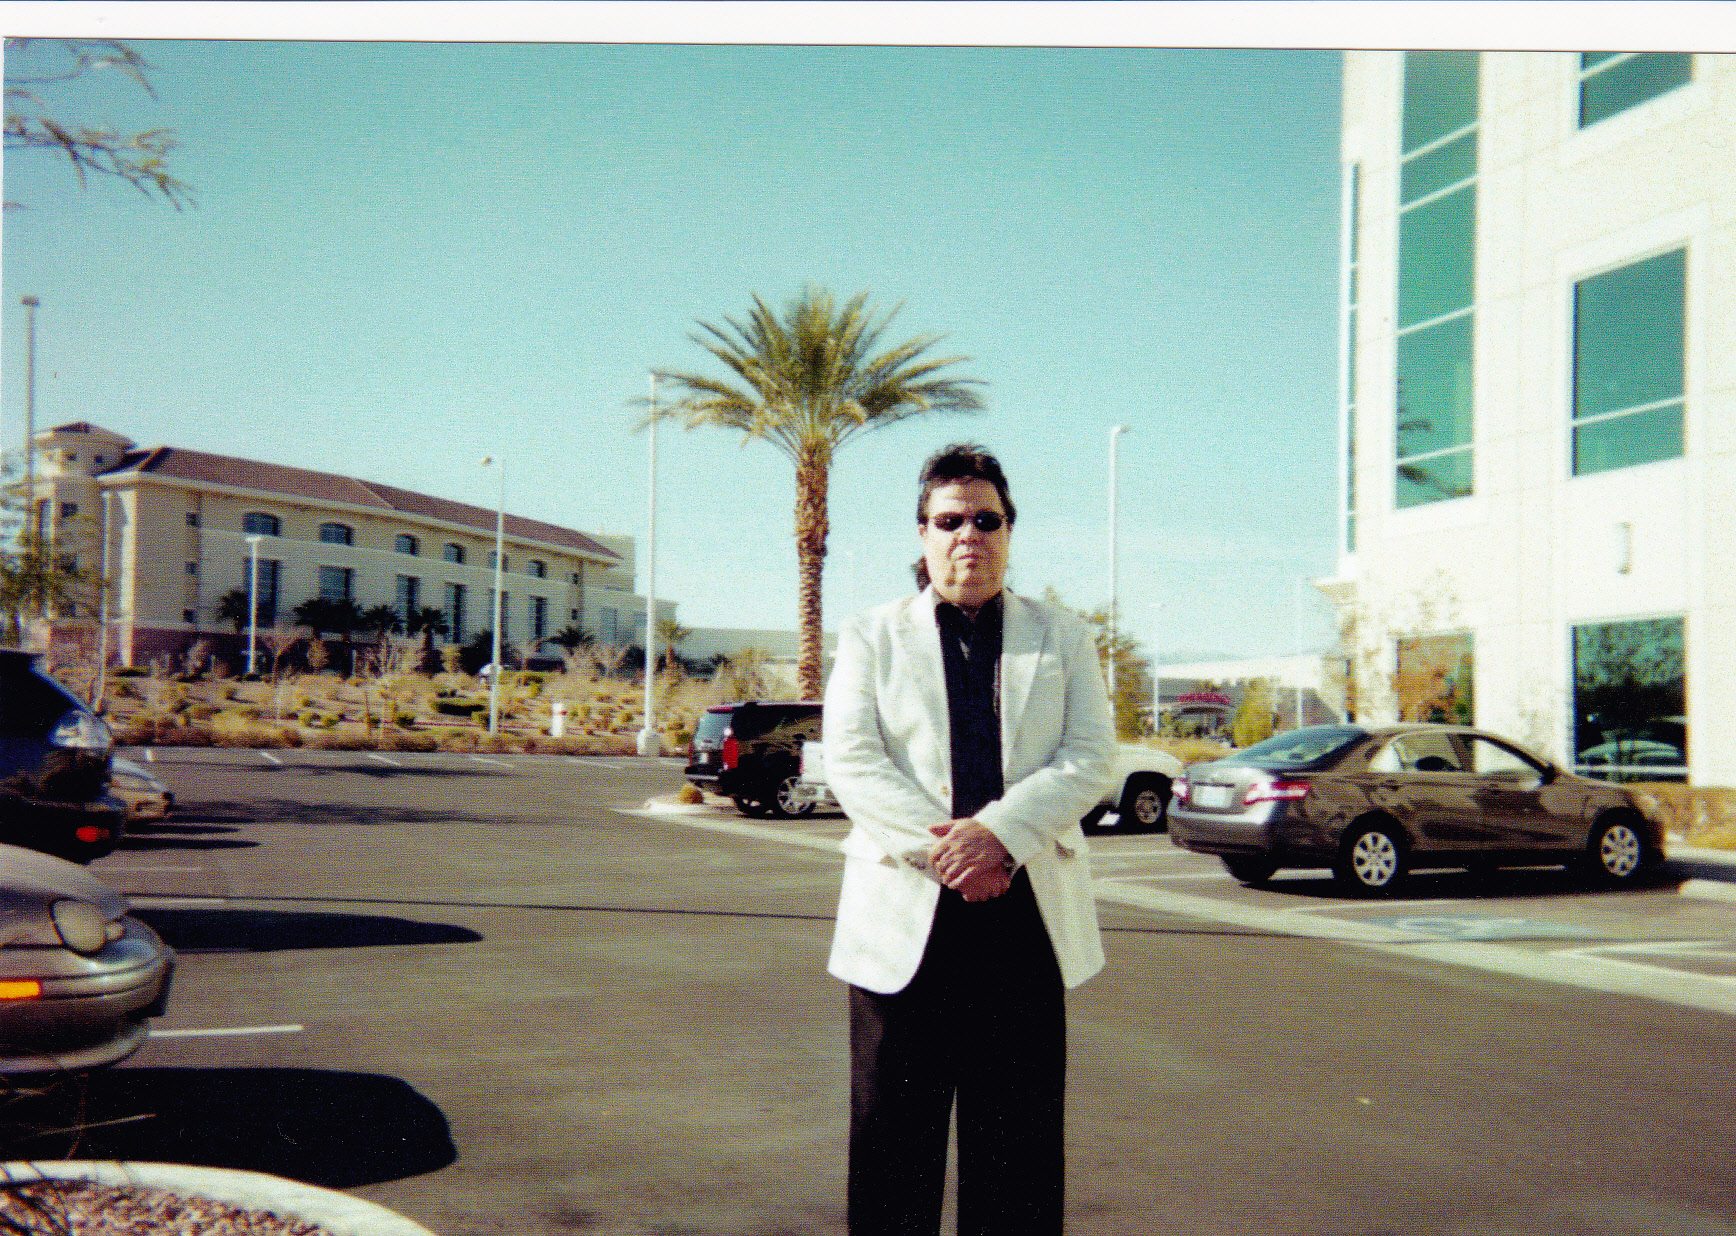 MI IN VEGAS 2011 FOR A MOVIE AUDITION ROLE